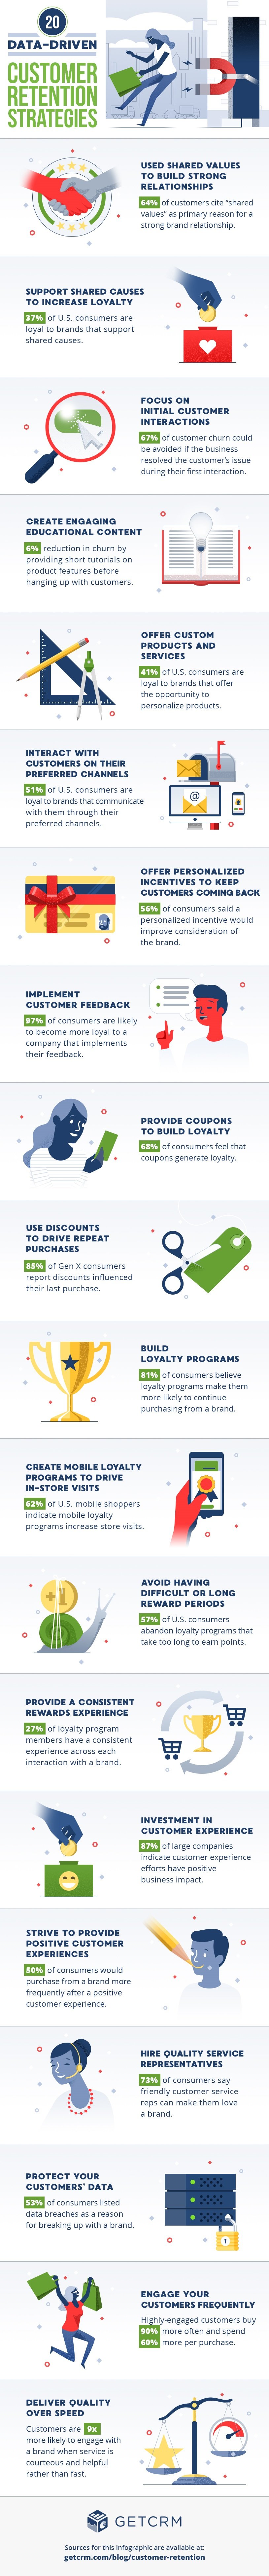 Customer retention infographic from GetCRM